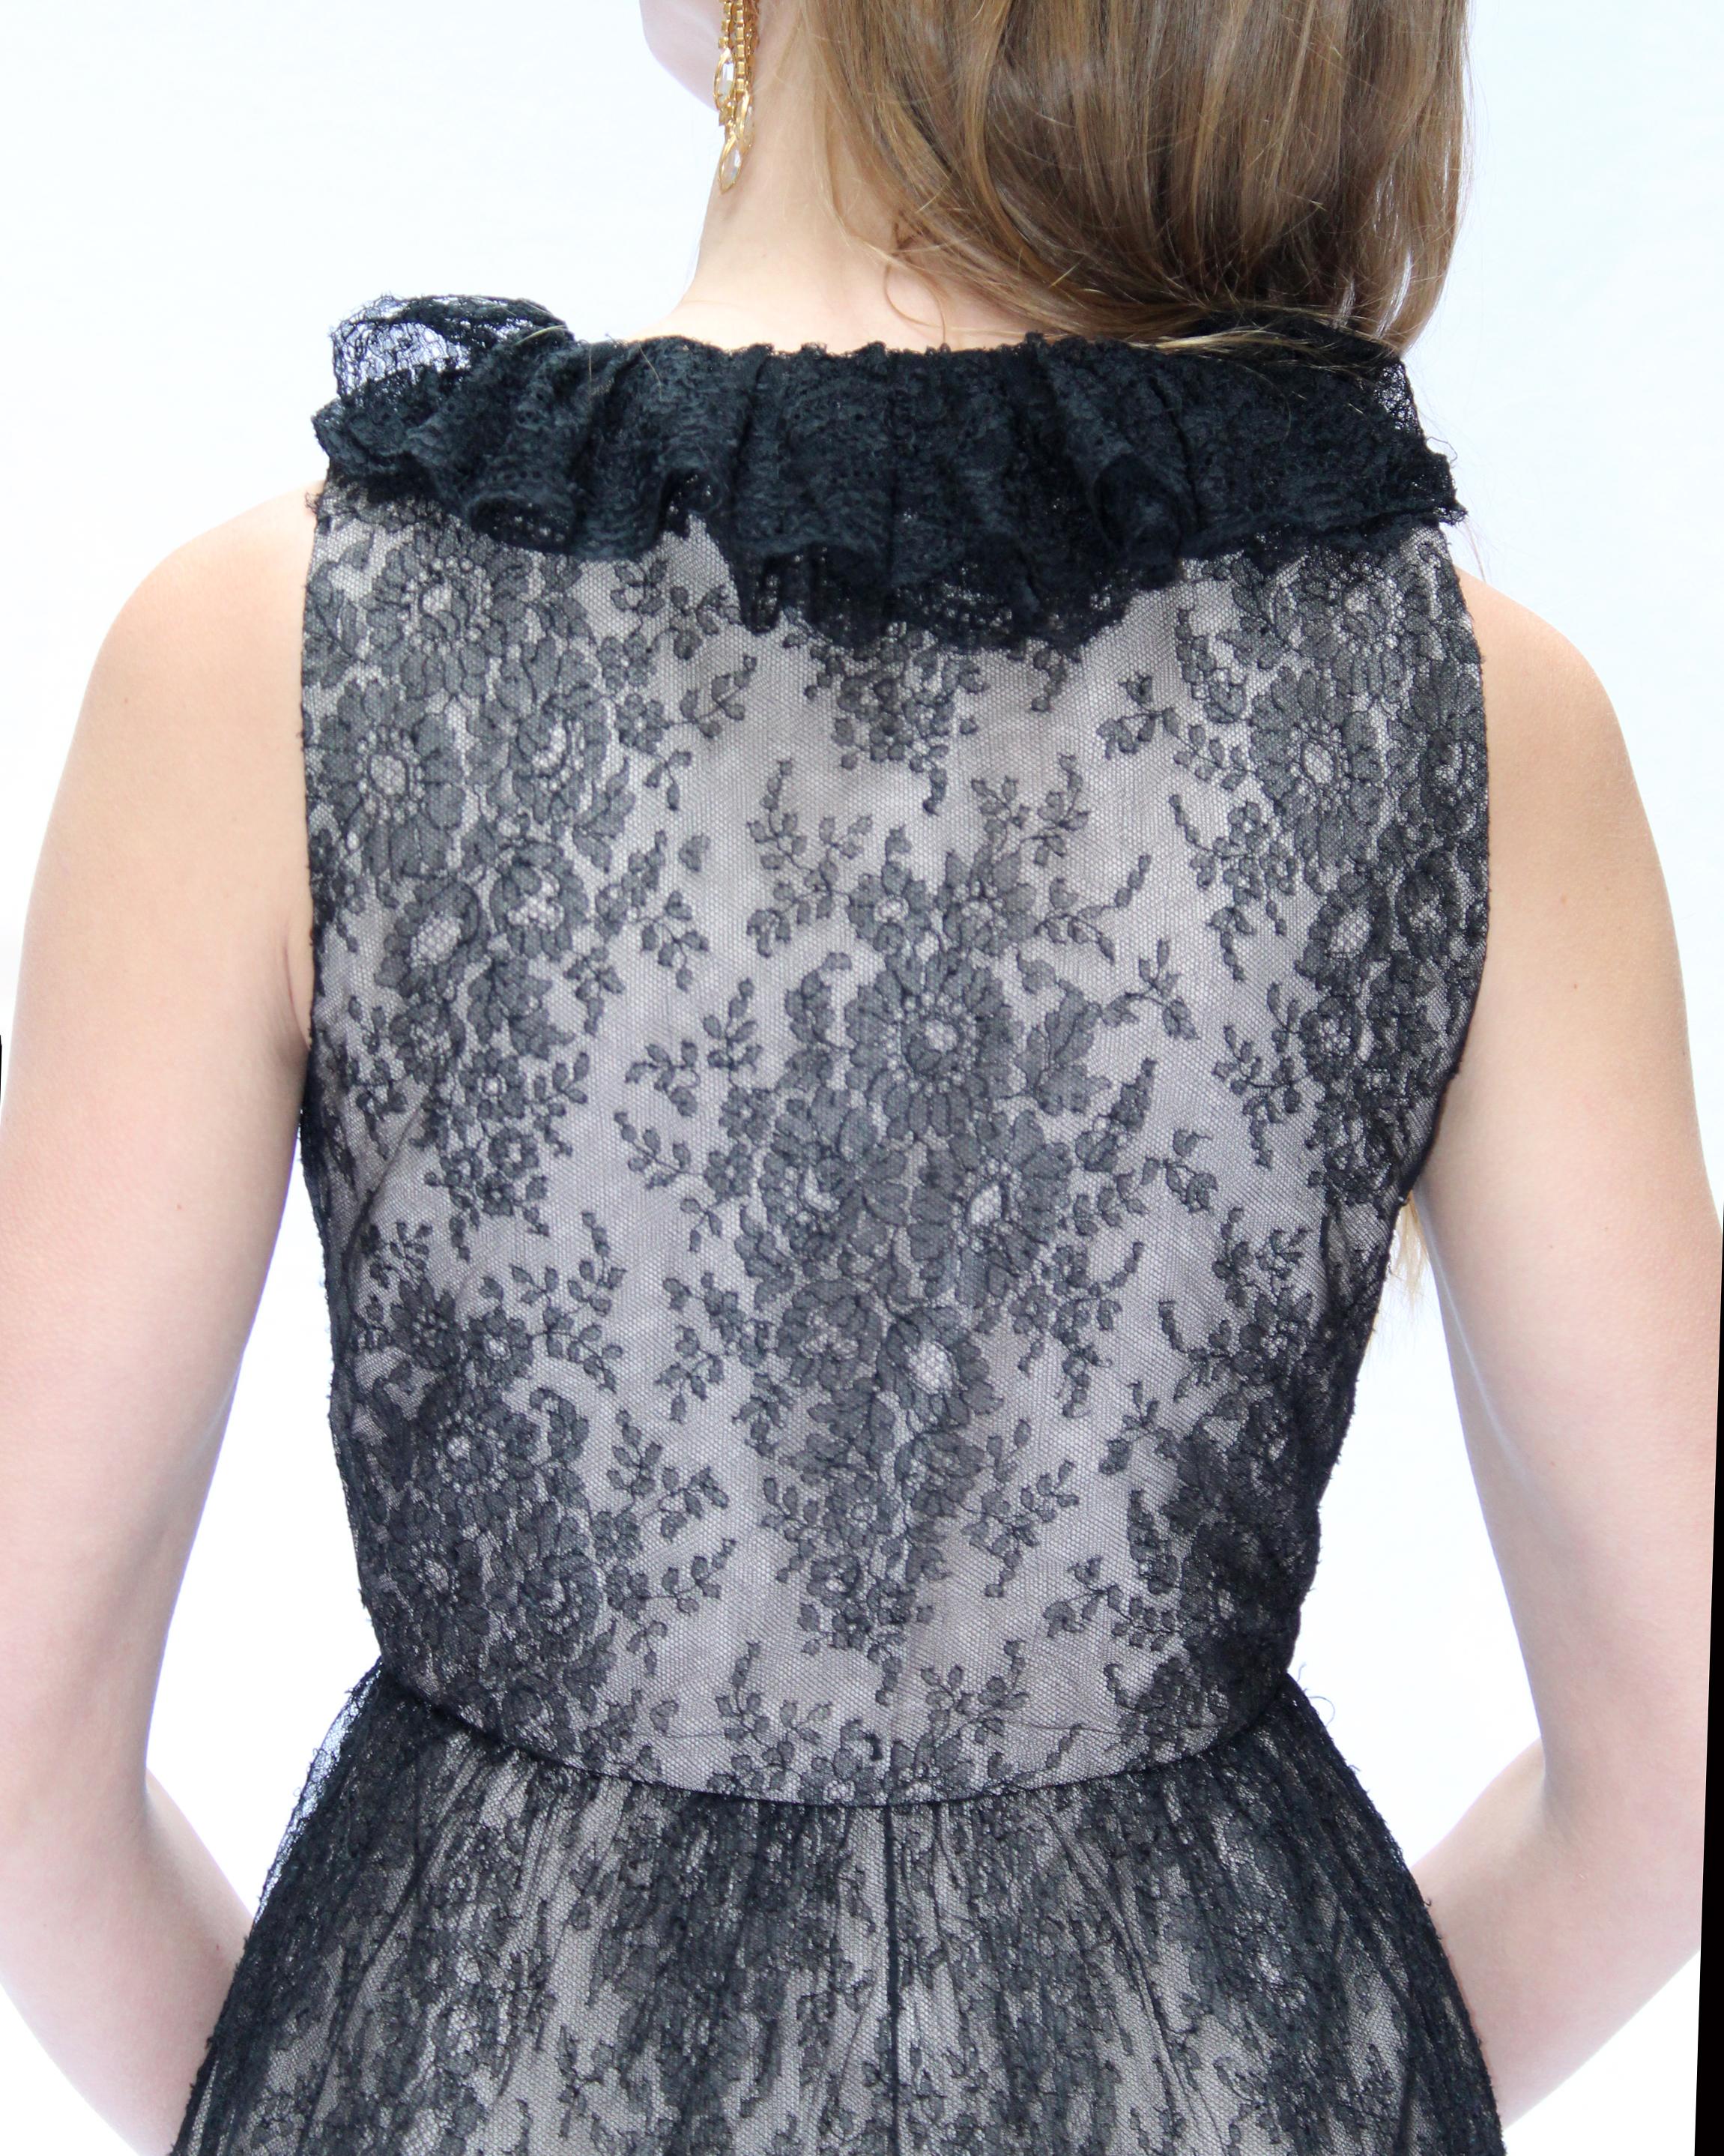 Women's 1960s Givenchy Black Lace Cocktail Dress (attributed) For Sale